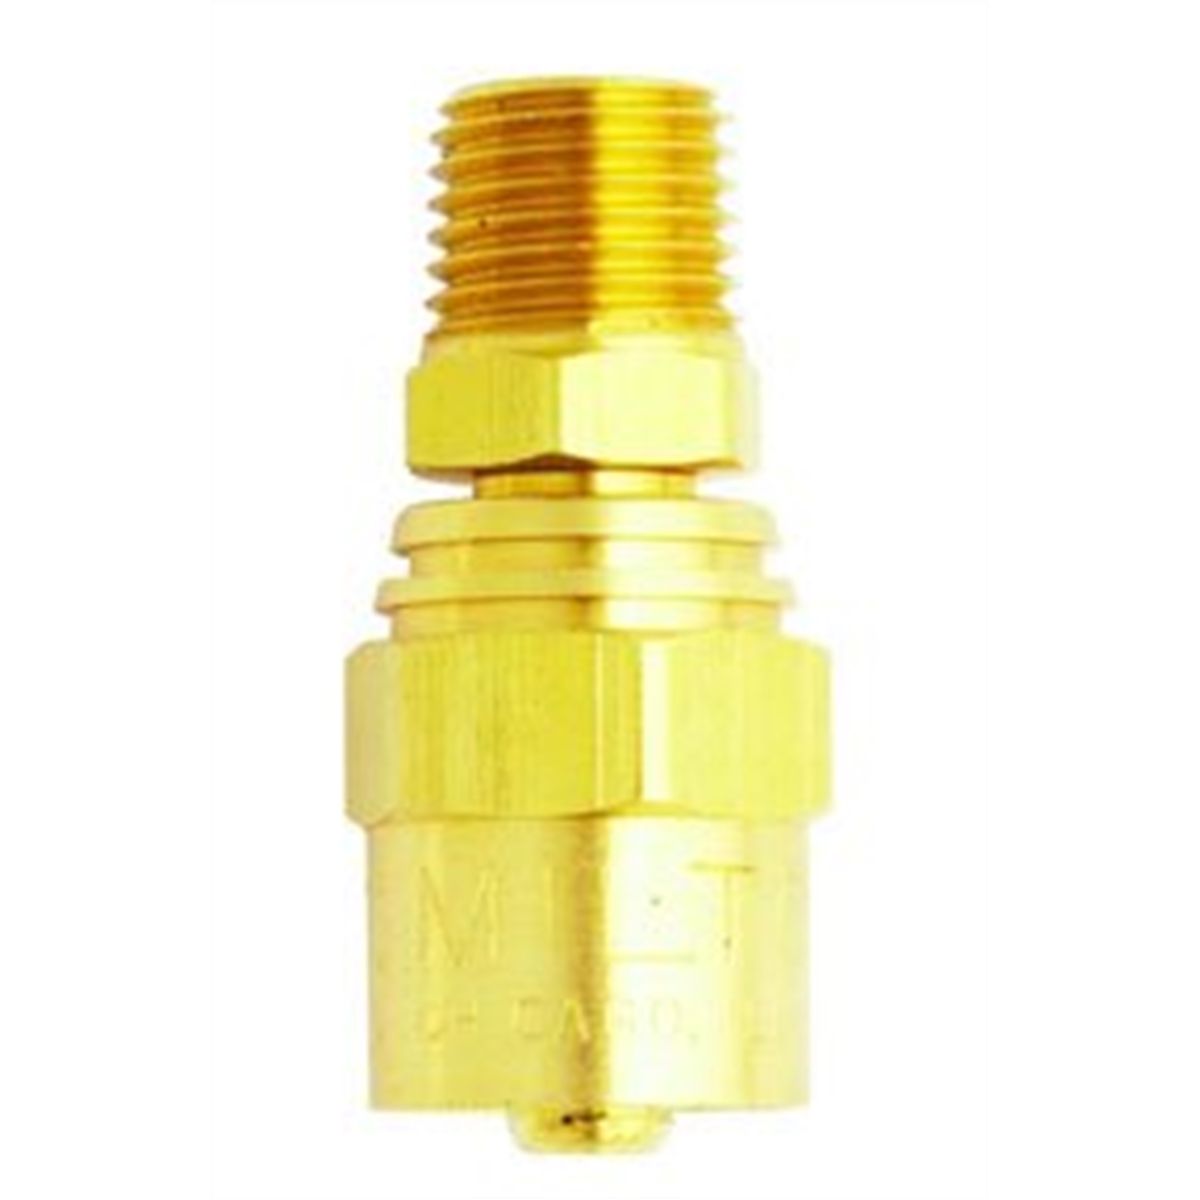 Re-usable Brass Hose Fitting Male End 11/16" OD 3/8" ID 1/4" NPT